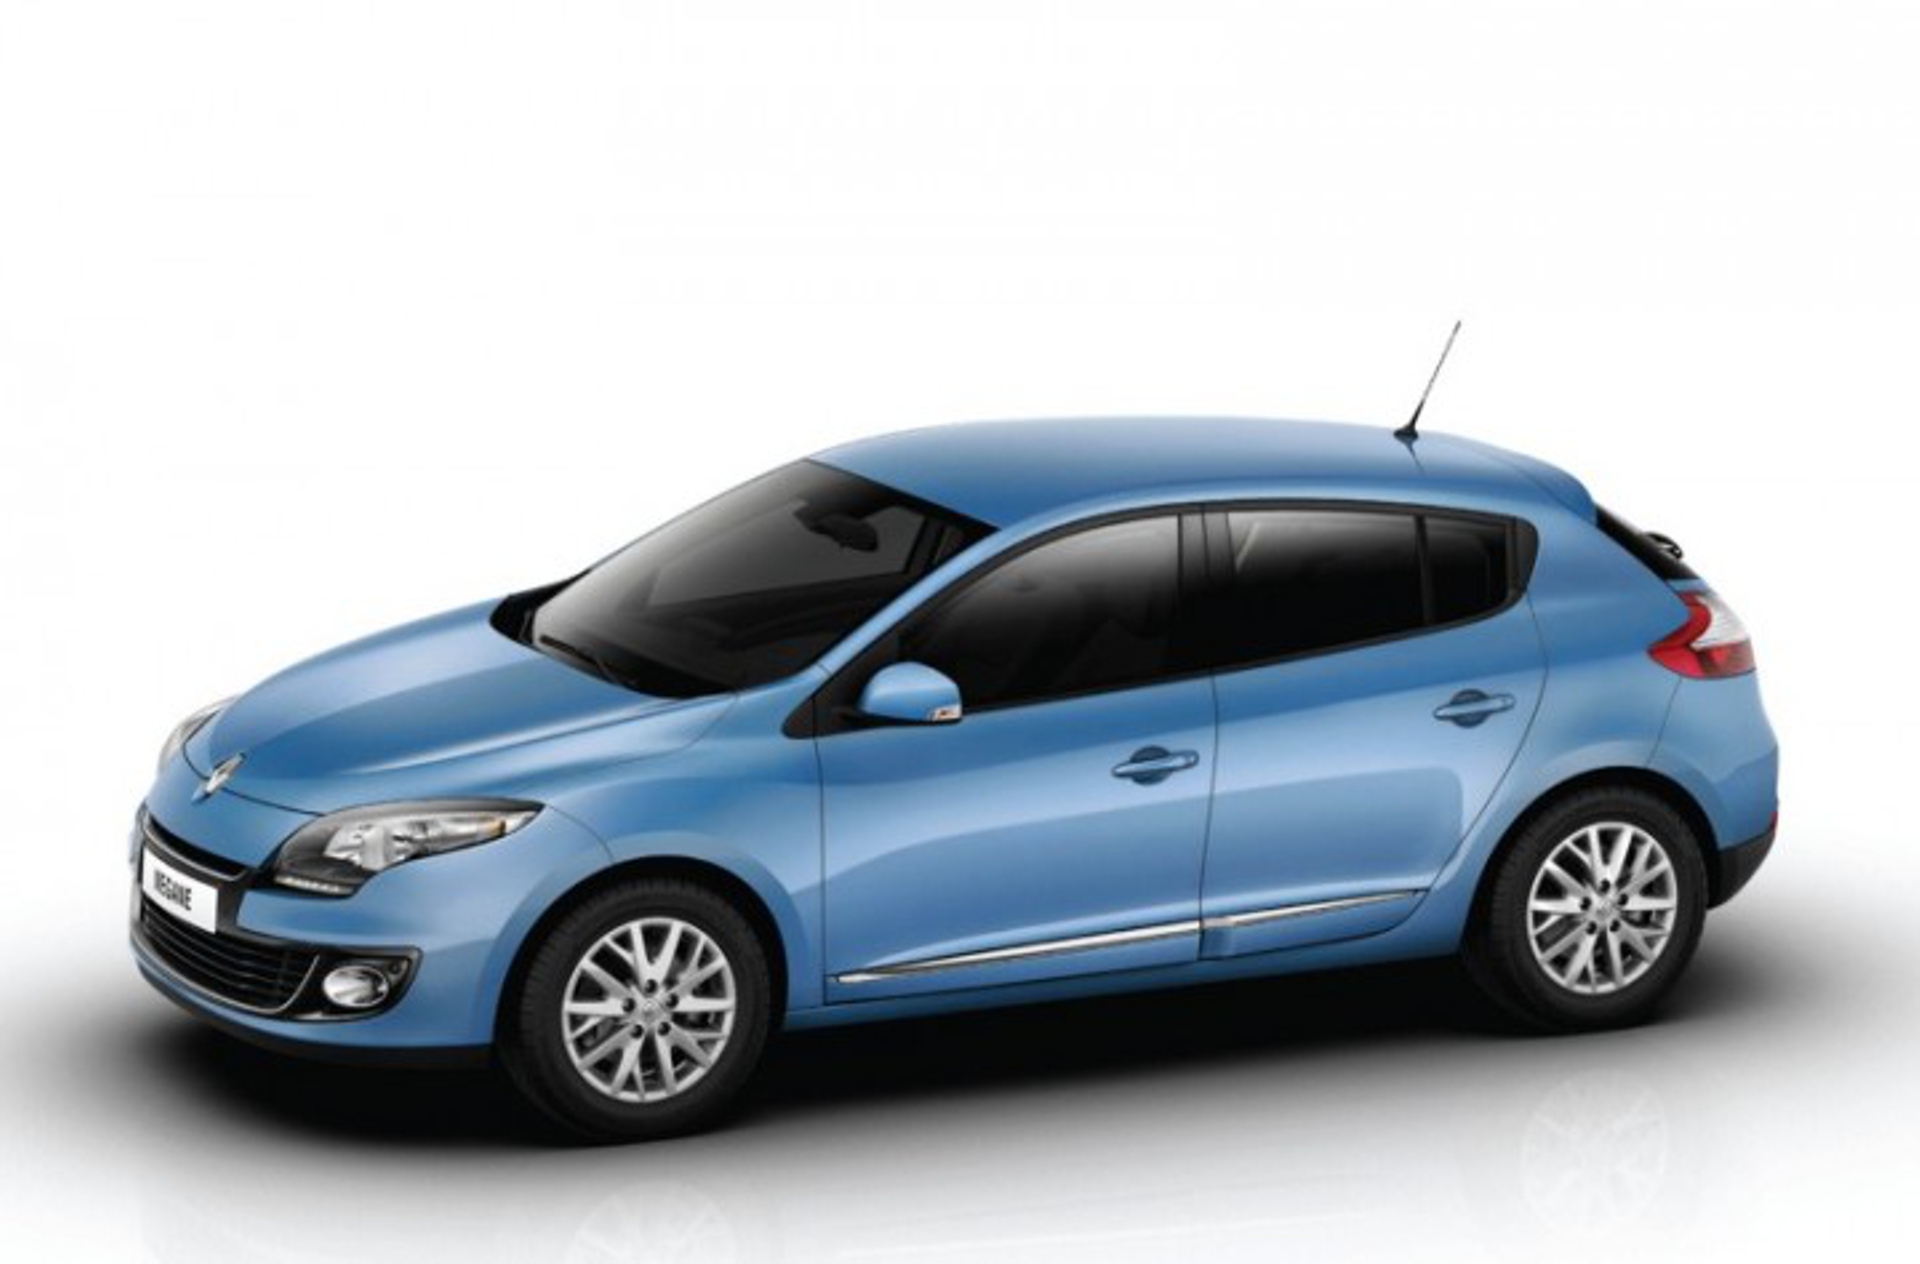 RENAULT FACELIFTS MÉGANE FOR 2012